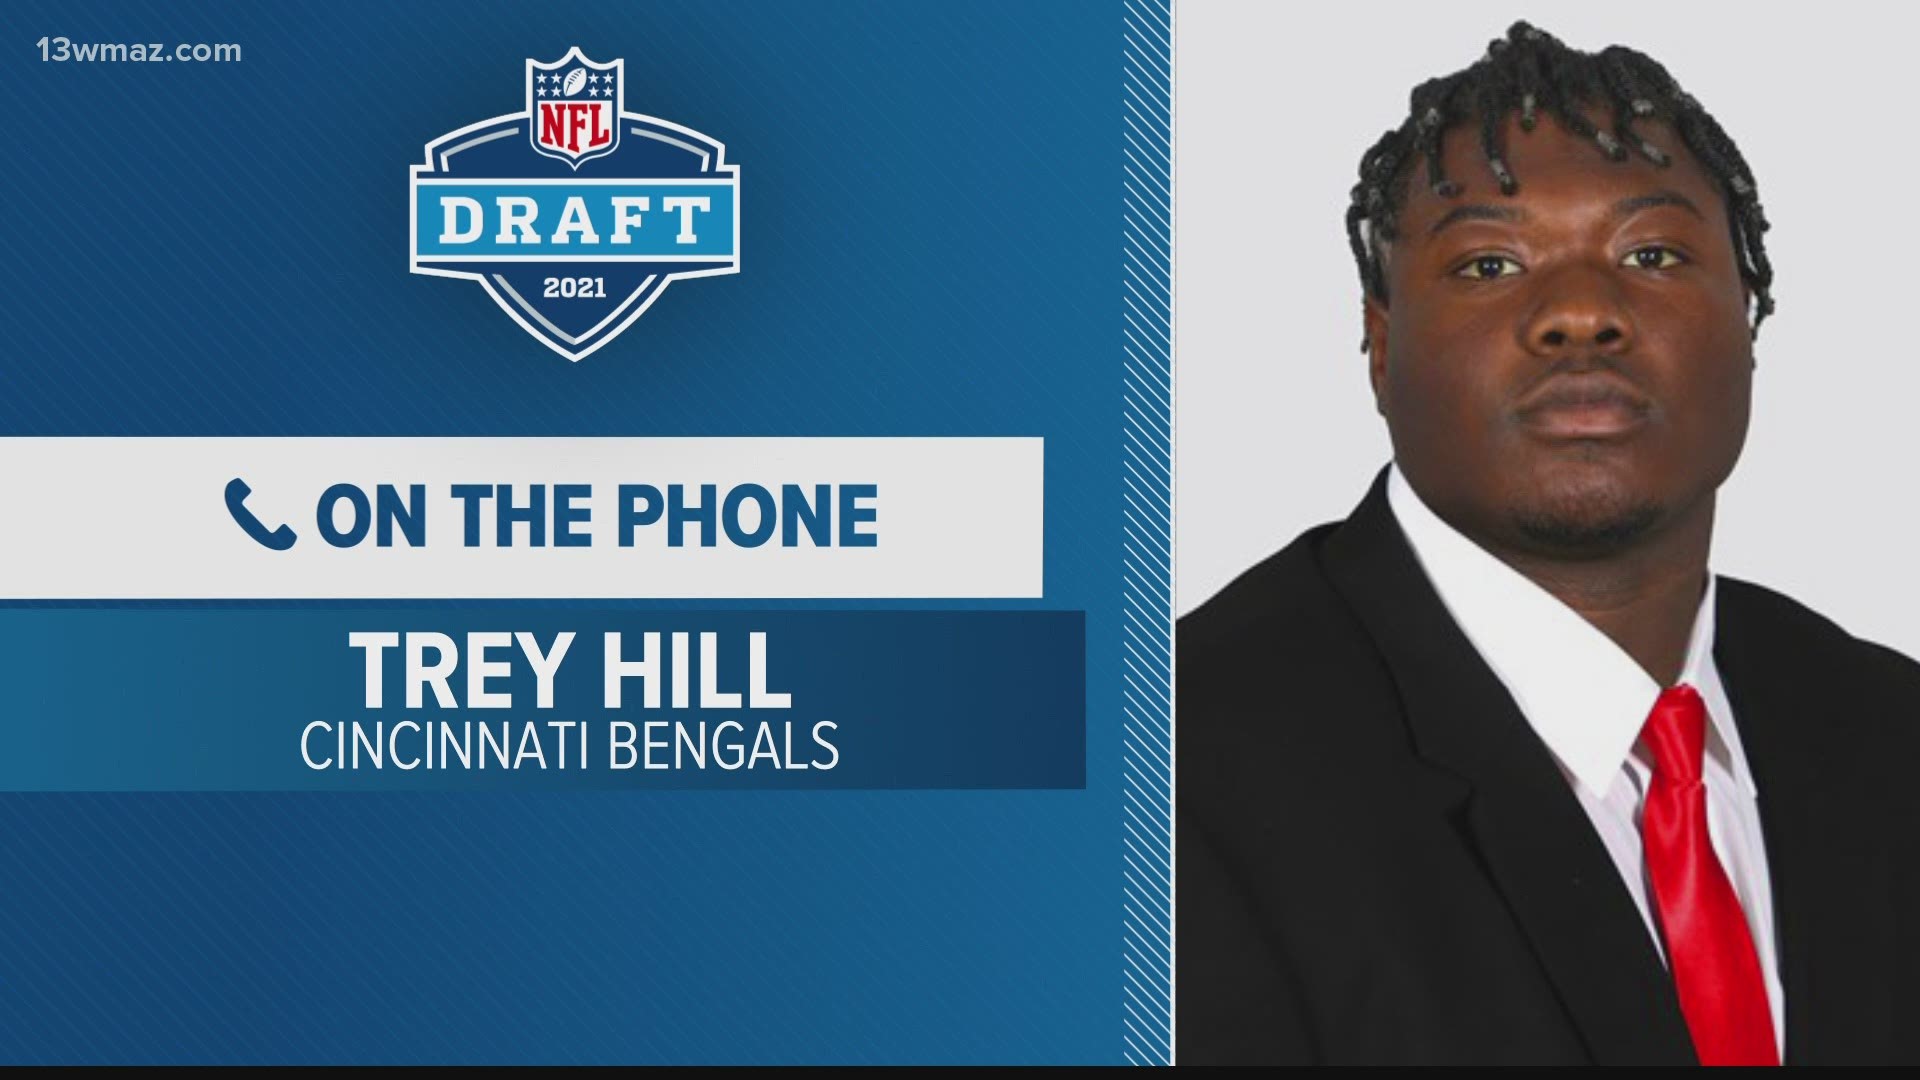 Trey Hill was drafted by the Cincinnati Bengals. Malik Herring signed a free agency deal with the Kansas City Chiefs